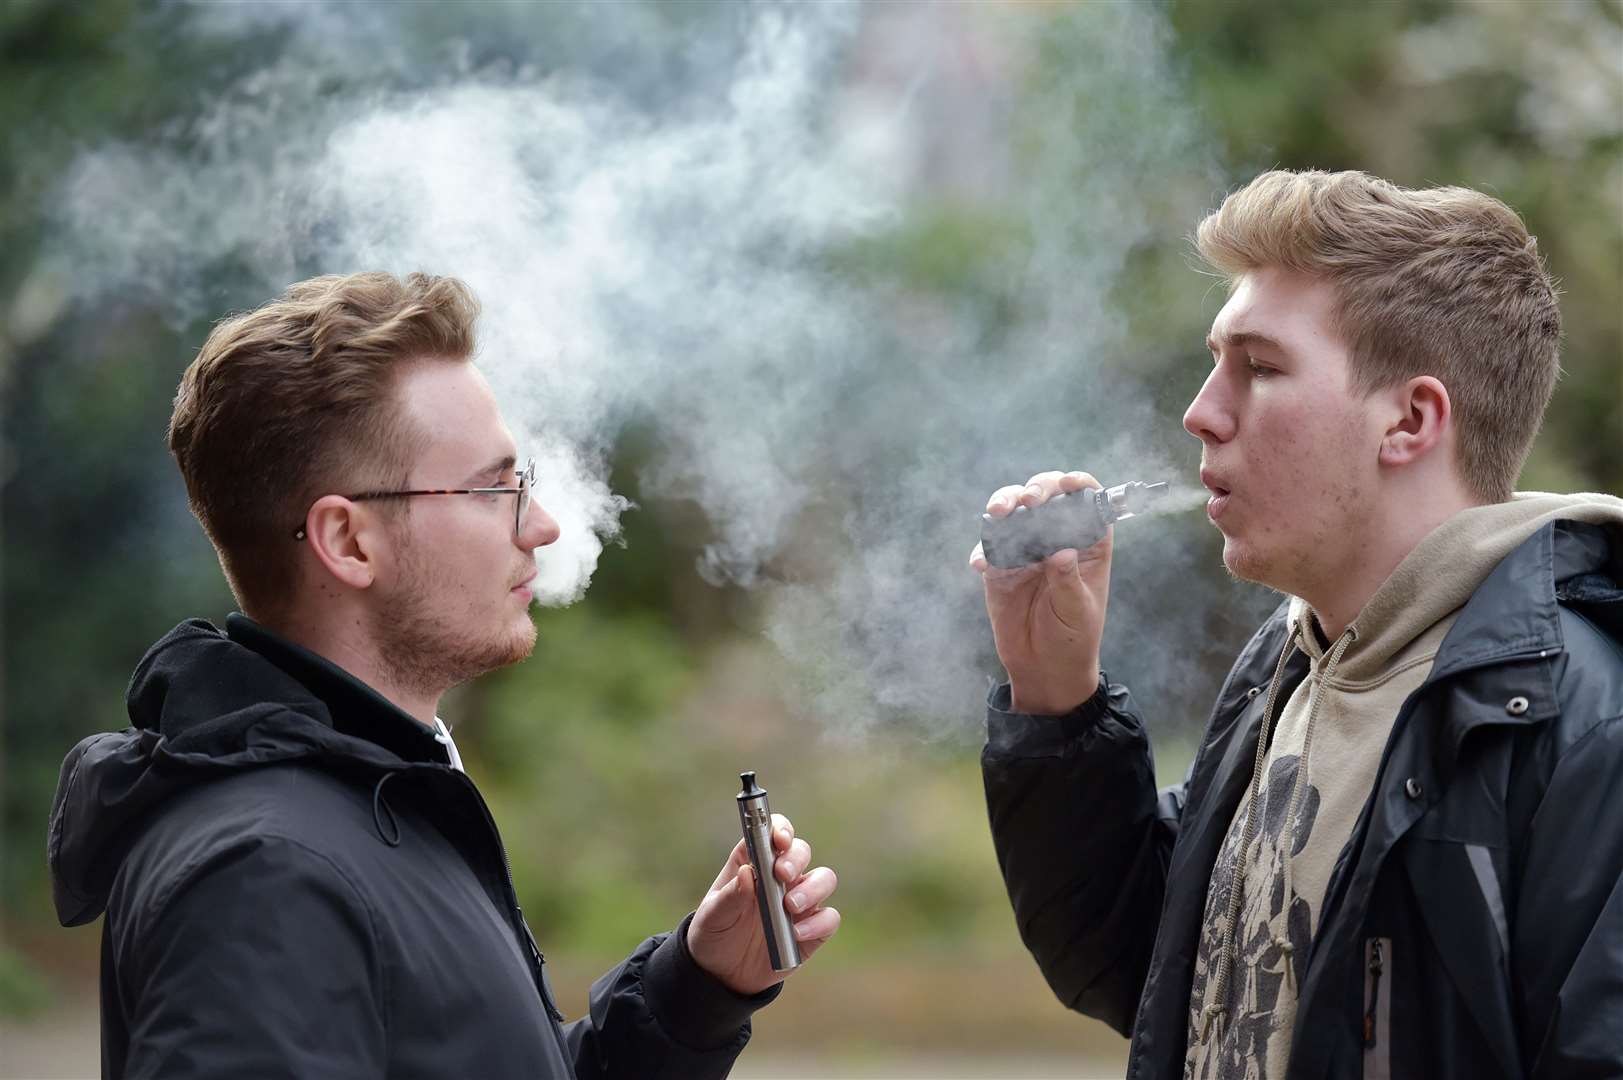 The plan forms part of the Government’s response to its consultation on smoking and vaping (Nicholas.T.Ansell/PA)